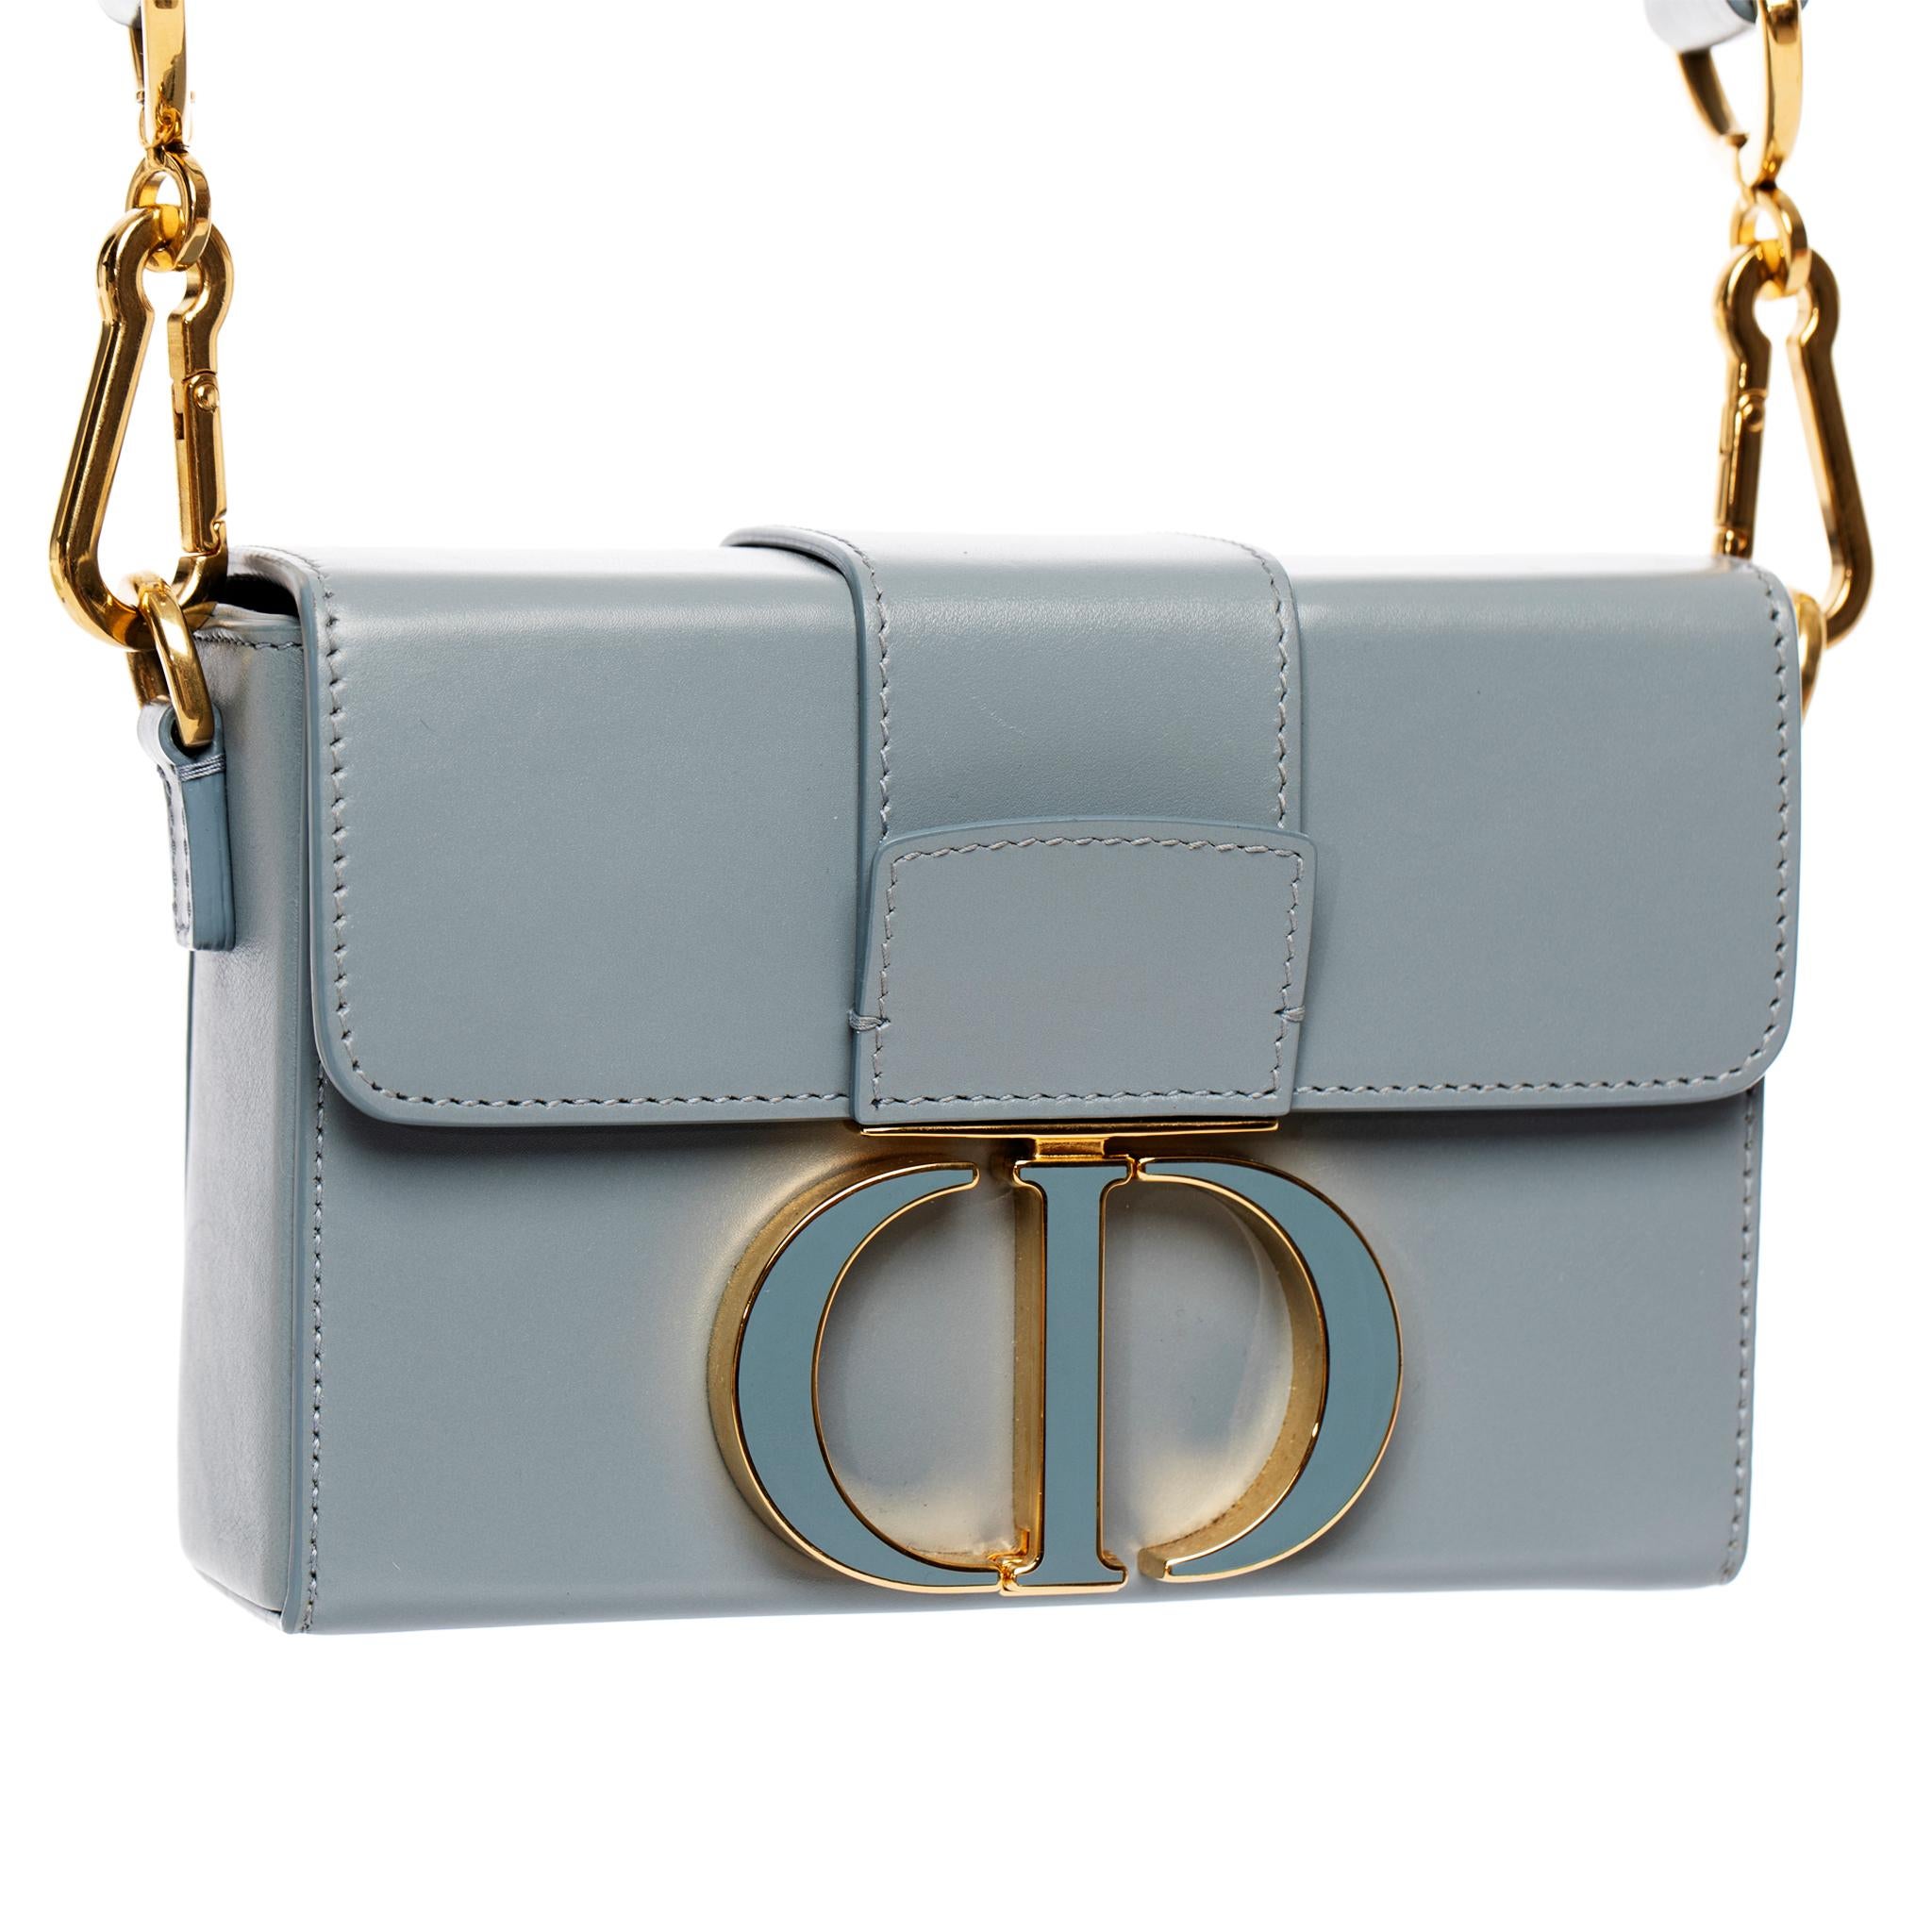 Christian Dior 30 Montaigne Bag Blue-Grey Leather Gold Tone Hardware For Sale 1